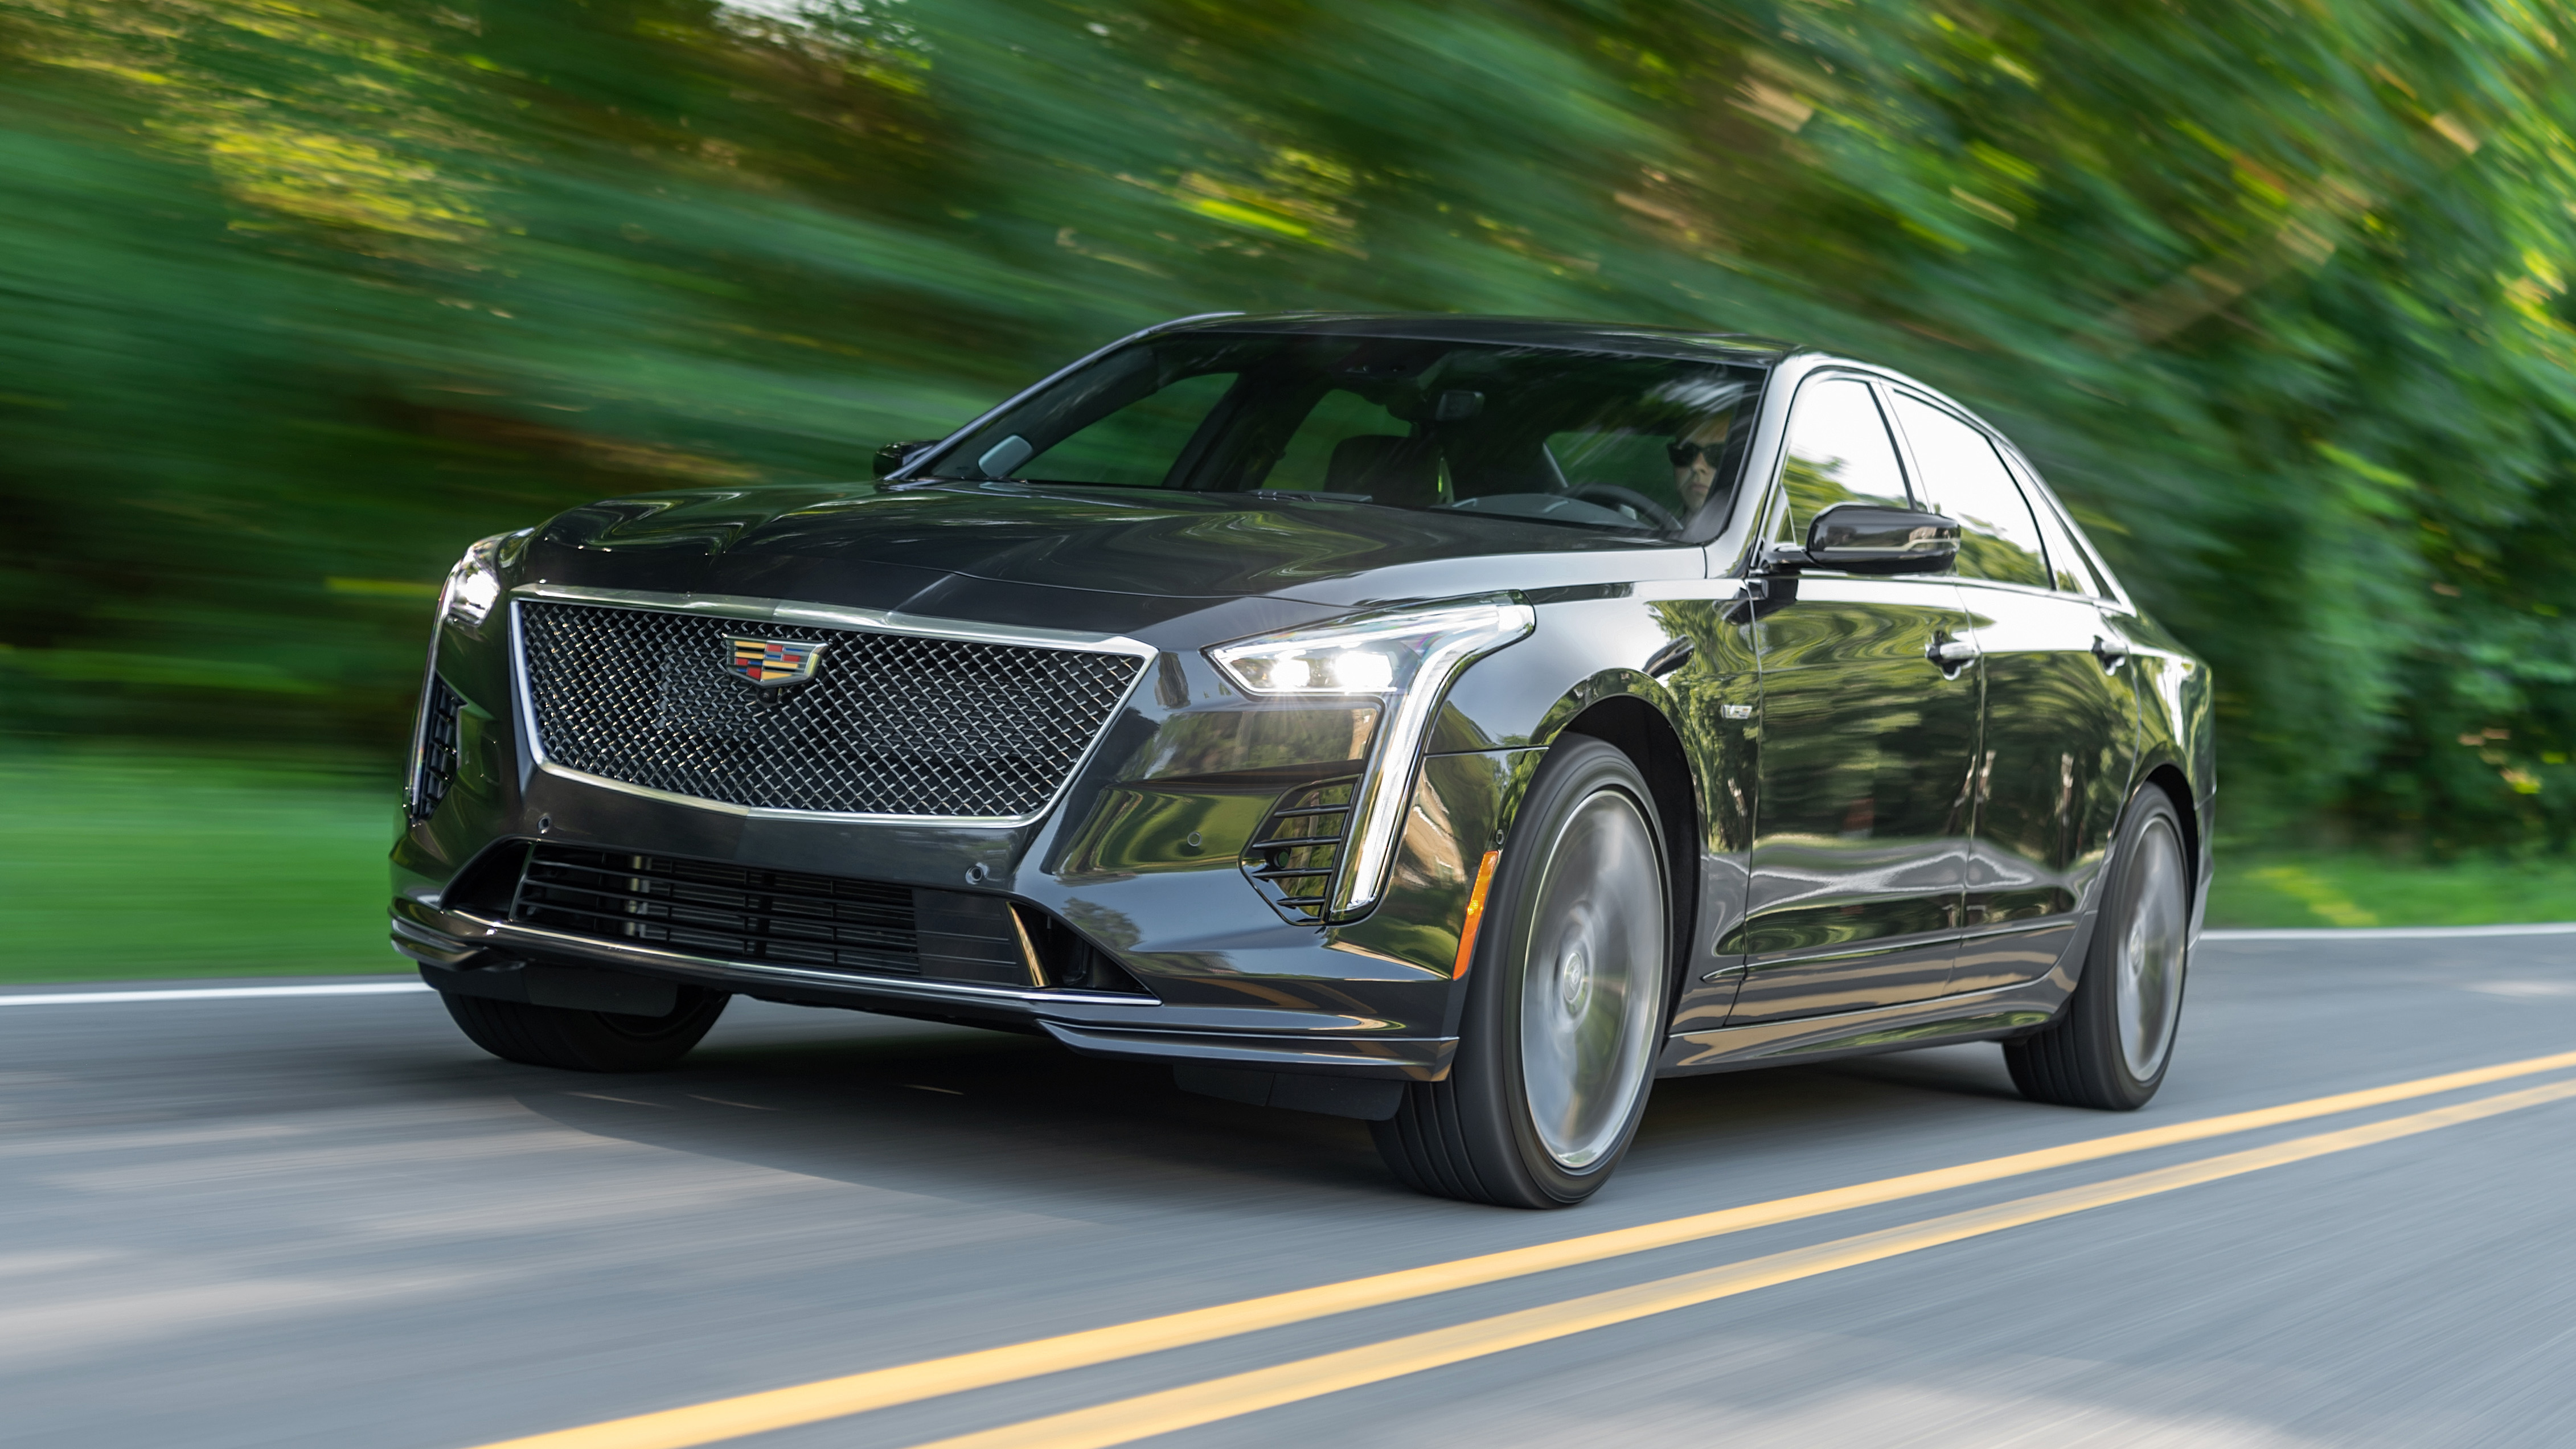 2020 Cadillac Ct6 V First Drive Review Whats New Specs And Driving